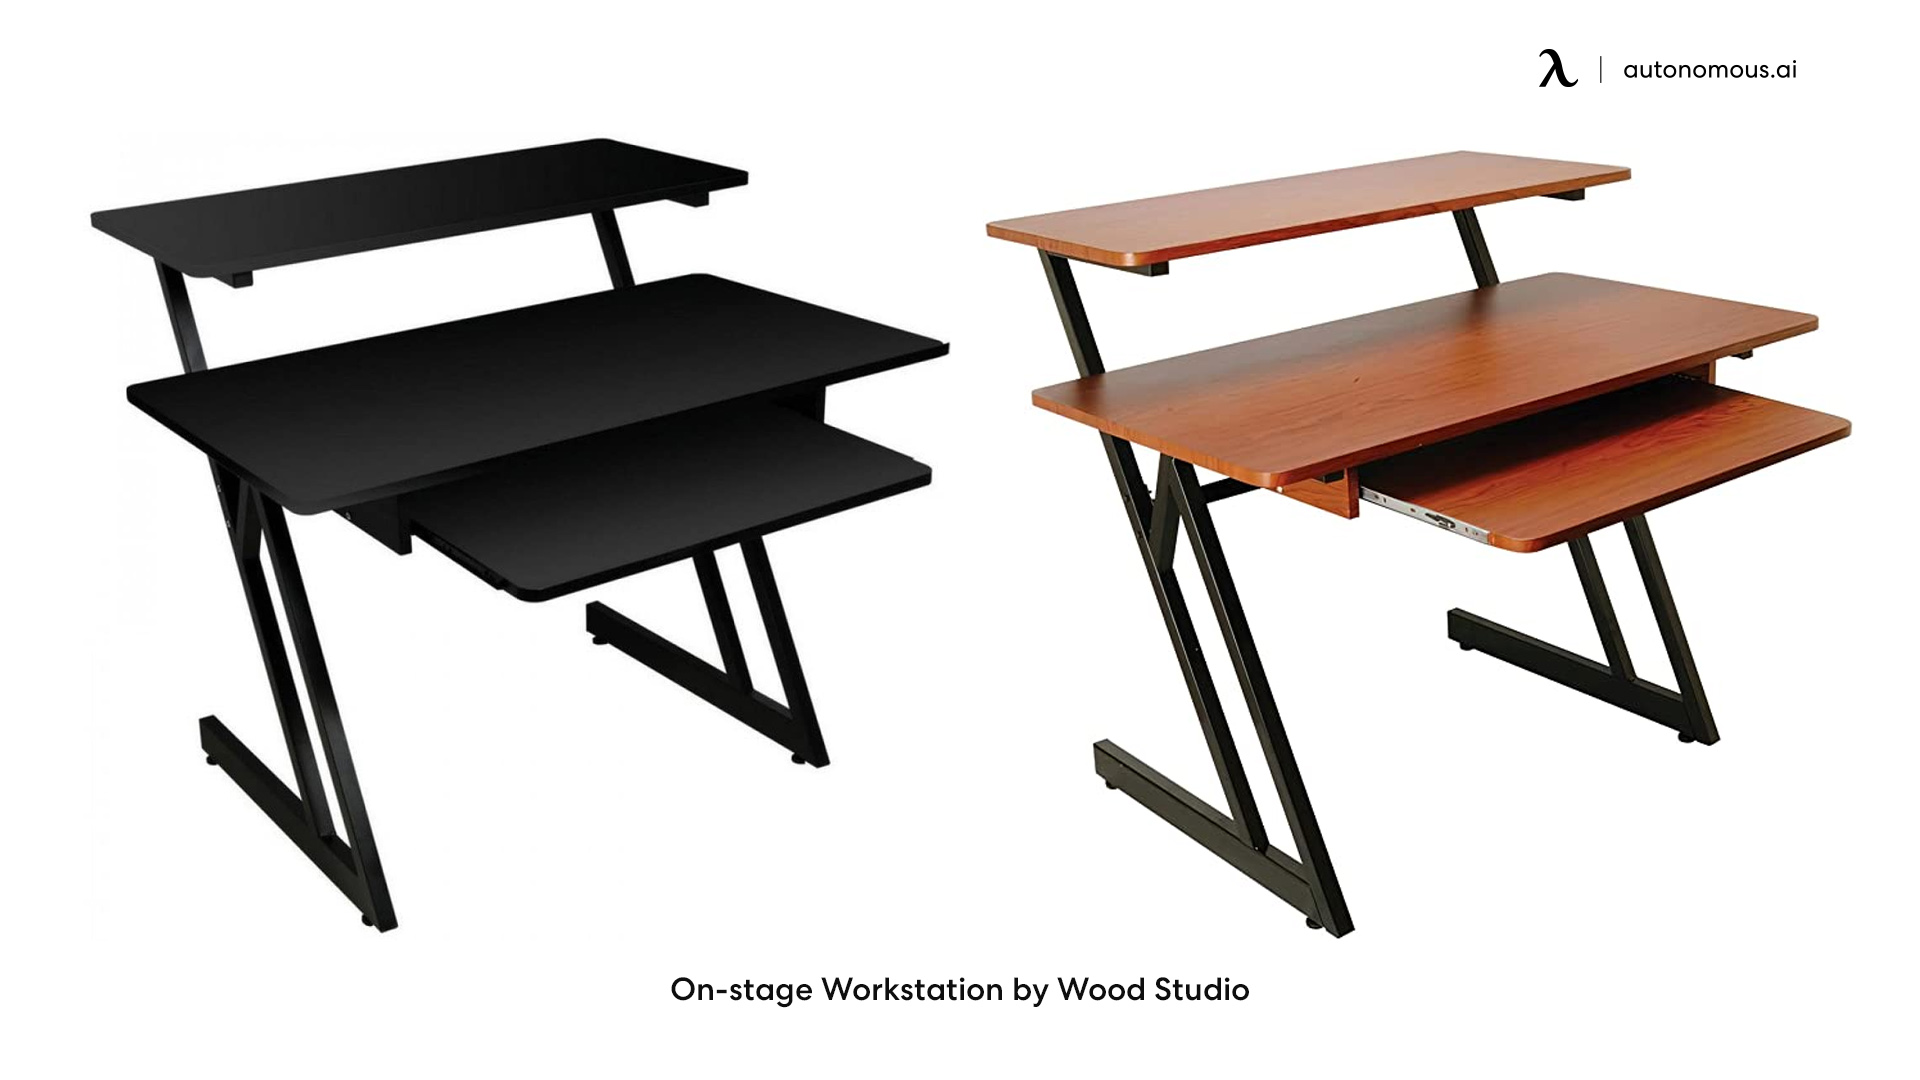 On-stage Workstation by Wood Studio